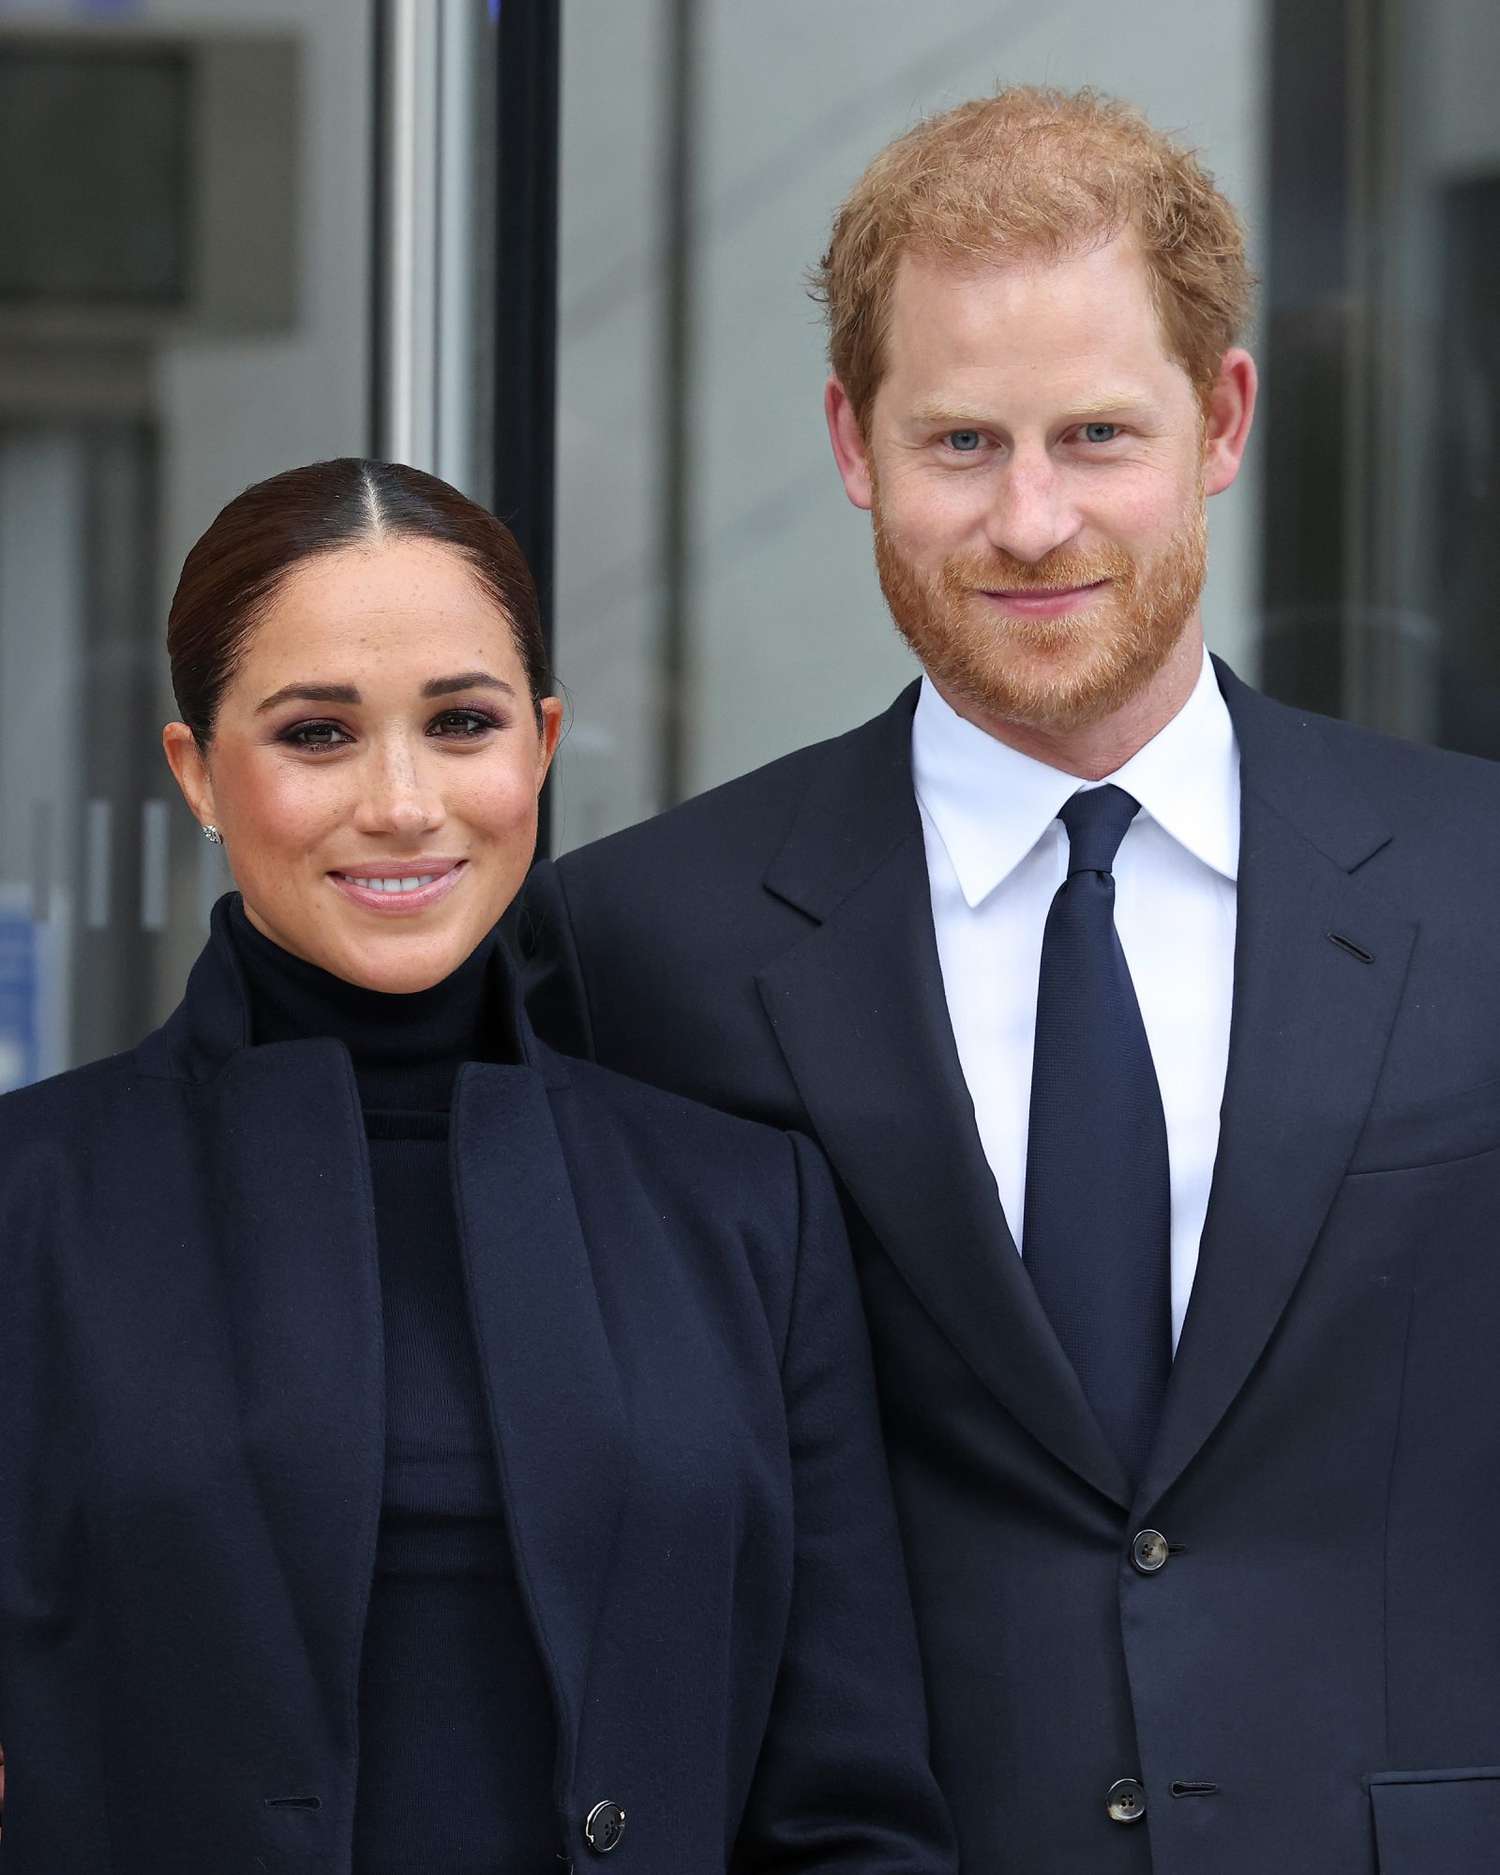 Meghan, Duchess of Sussex, and Prince Harry, Duke of Sussex